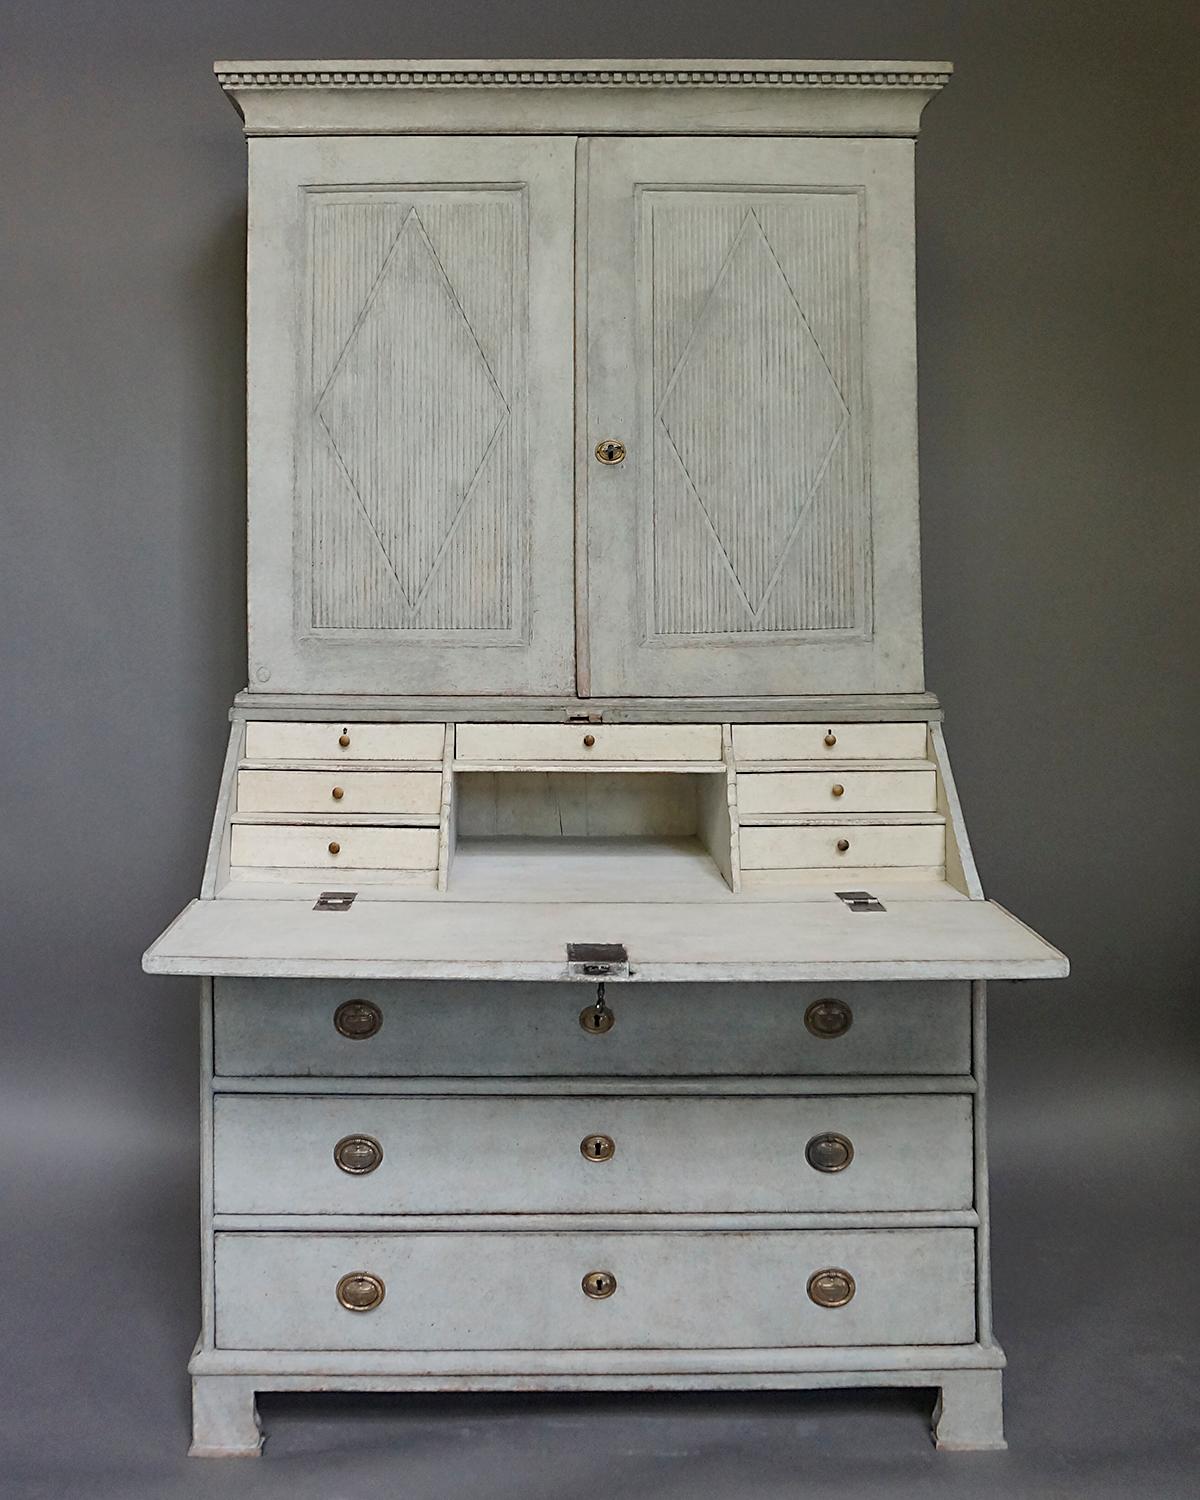 Period neoclassical secretary in two parts, Sweden circa 1840. The upper section has a straight cornice with dentil molding and double doors with raised, reeded panels with incised lozenges. Inside are three shelves with a central divider. The lower